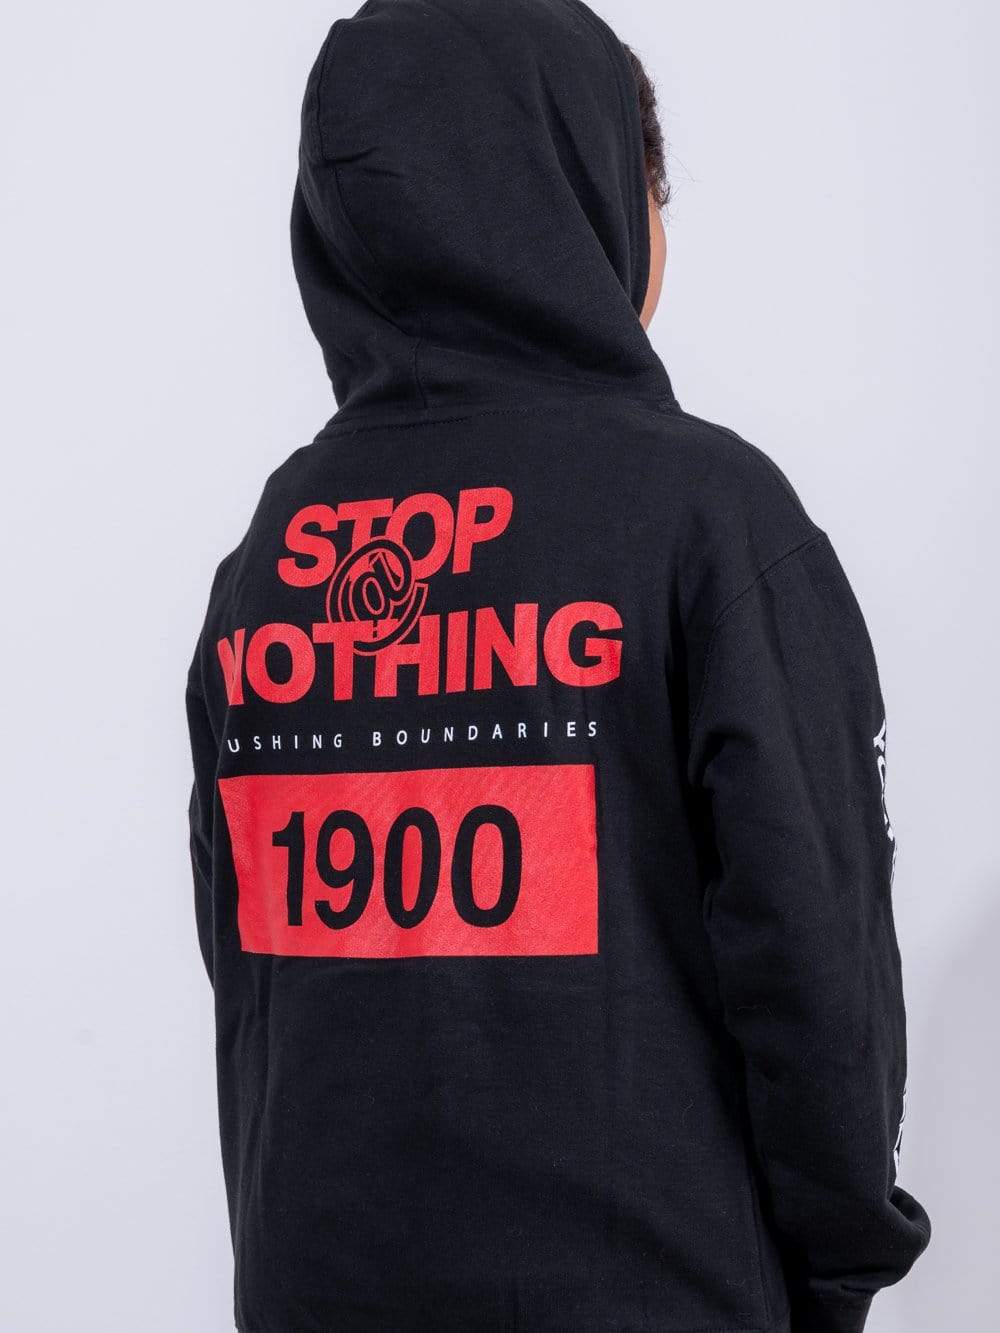 Fast Track Youth Hoodie - Black – Young & Reckless